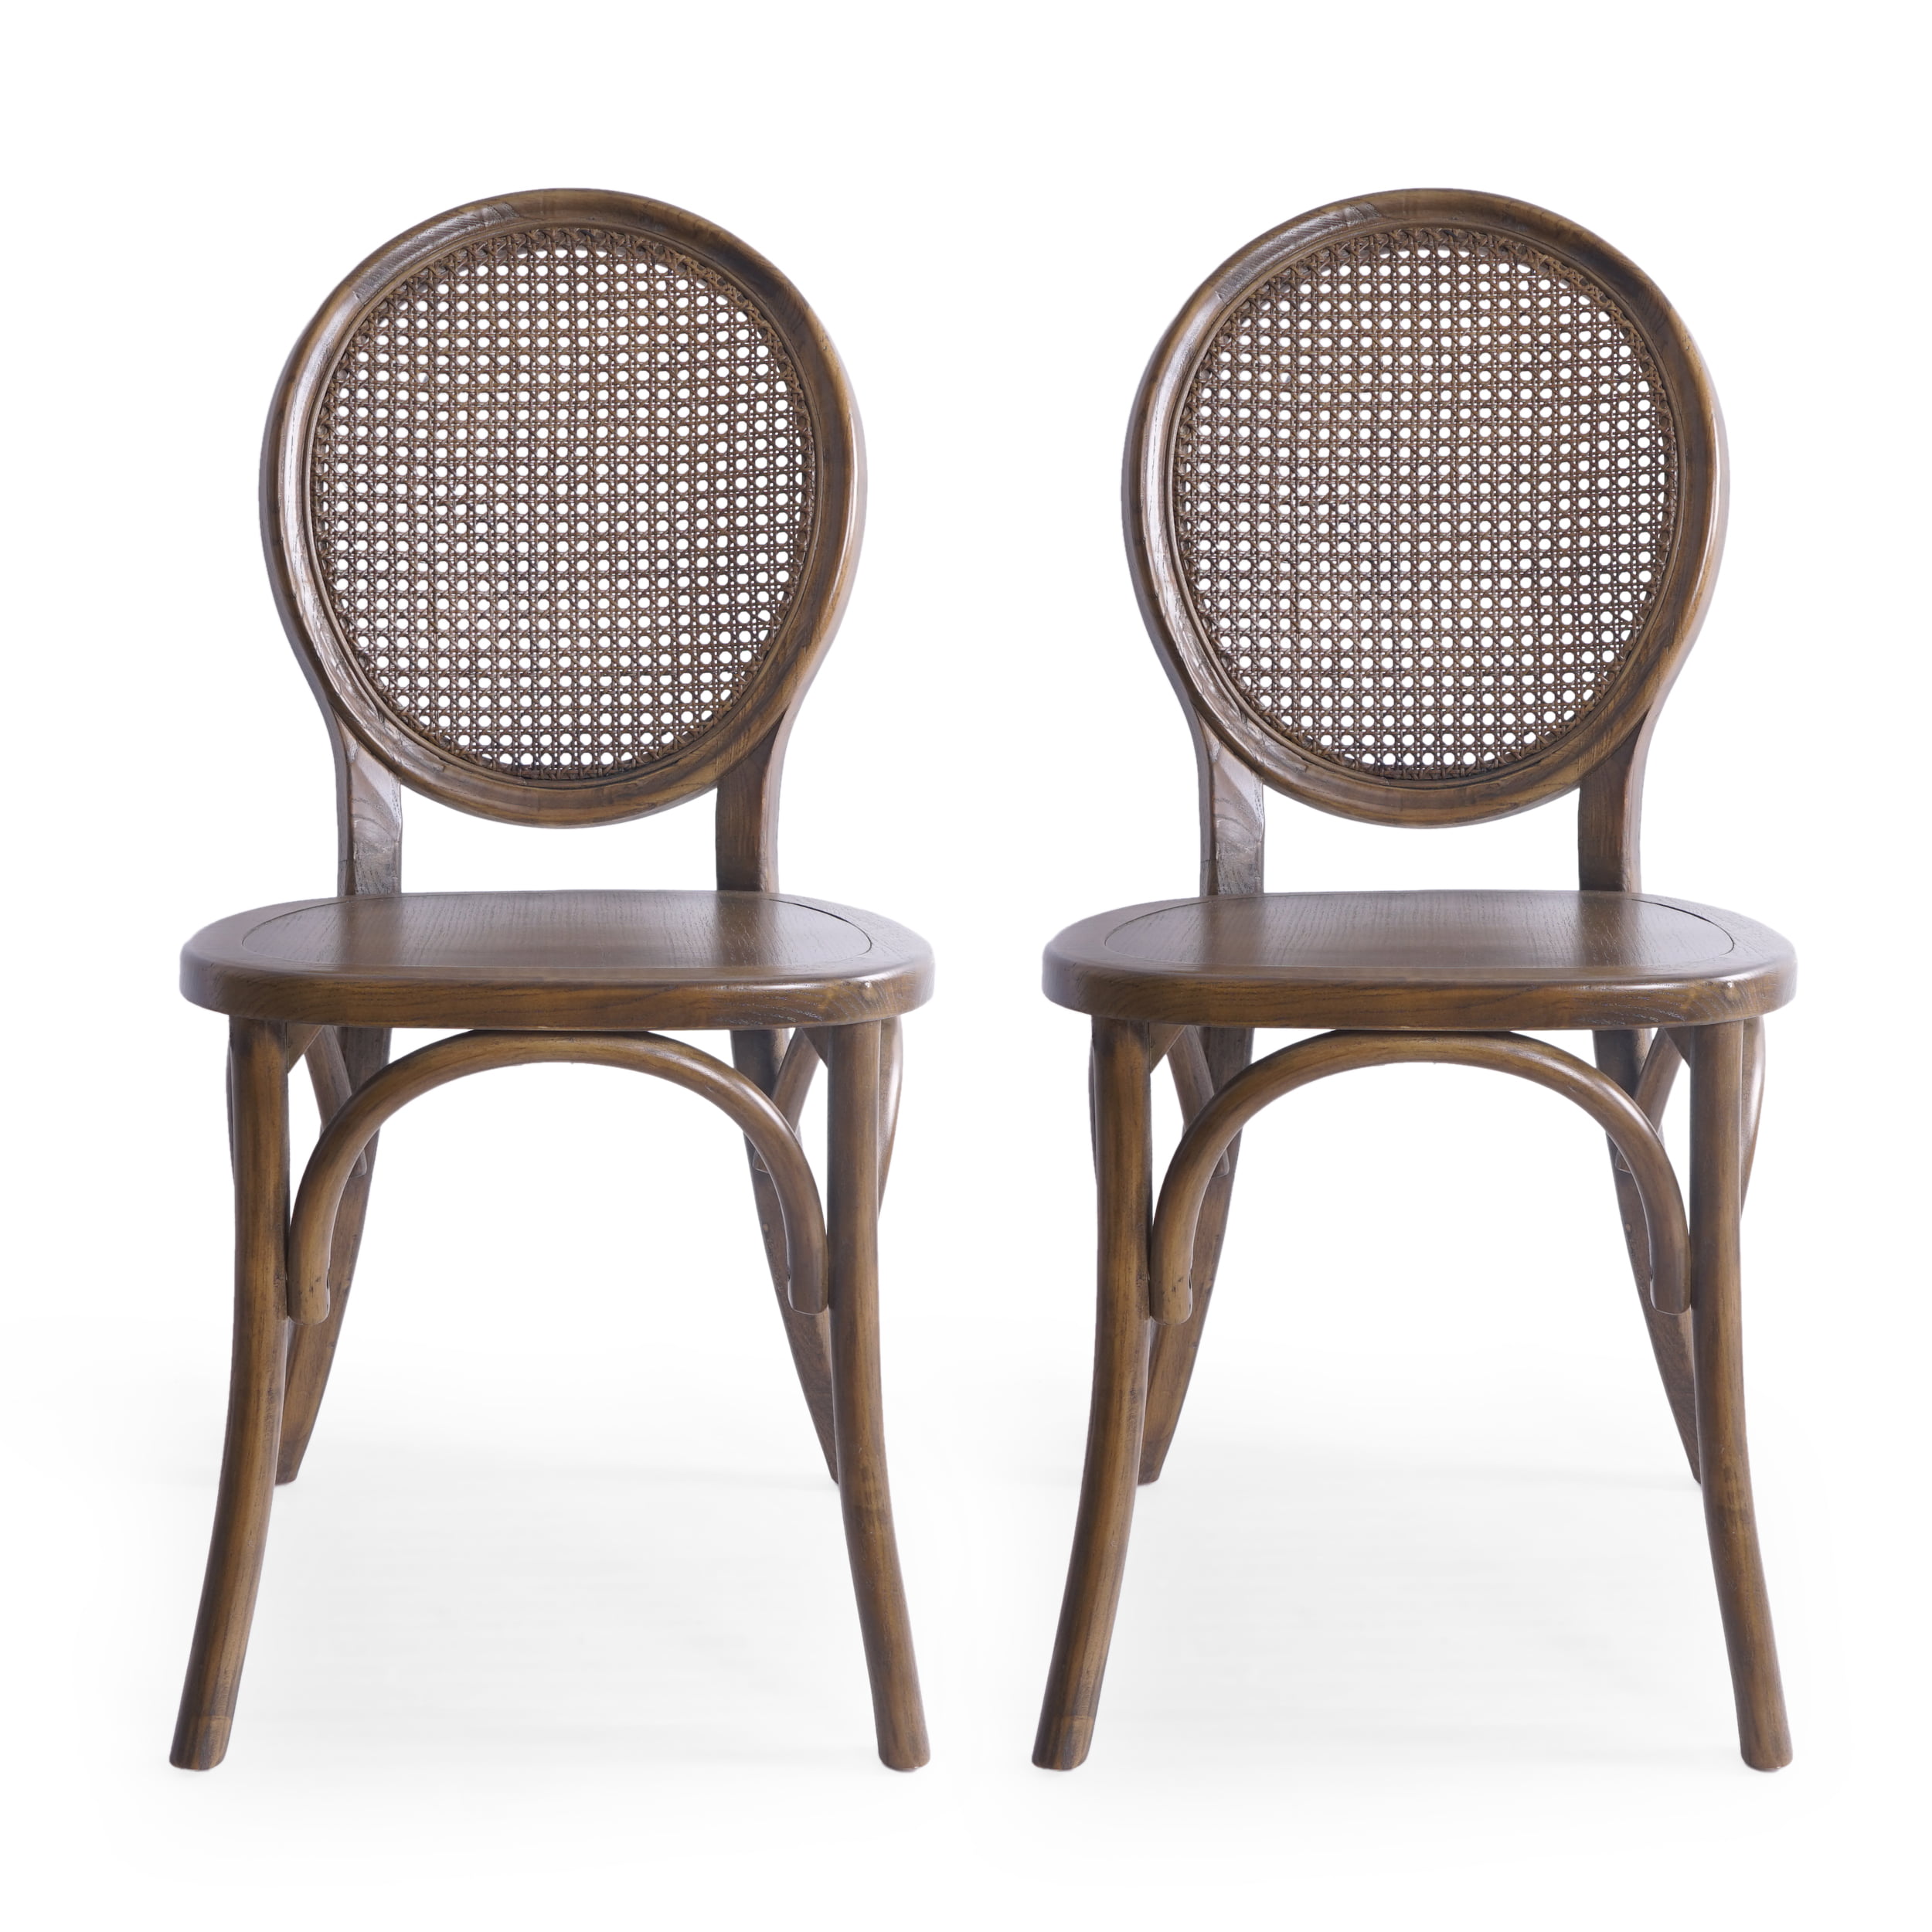 Silverdew Indoor Wicker Dining Chairs Light Brown and Black Set of 2 